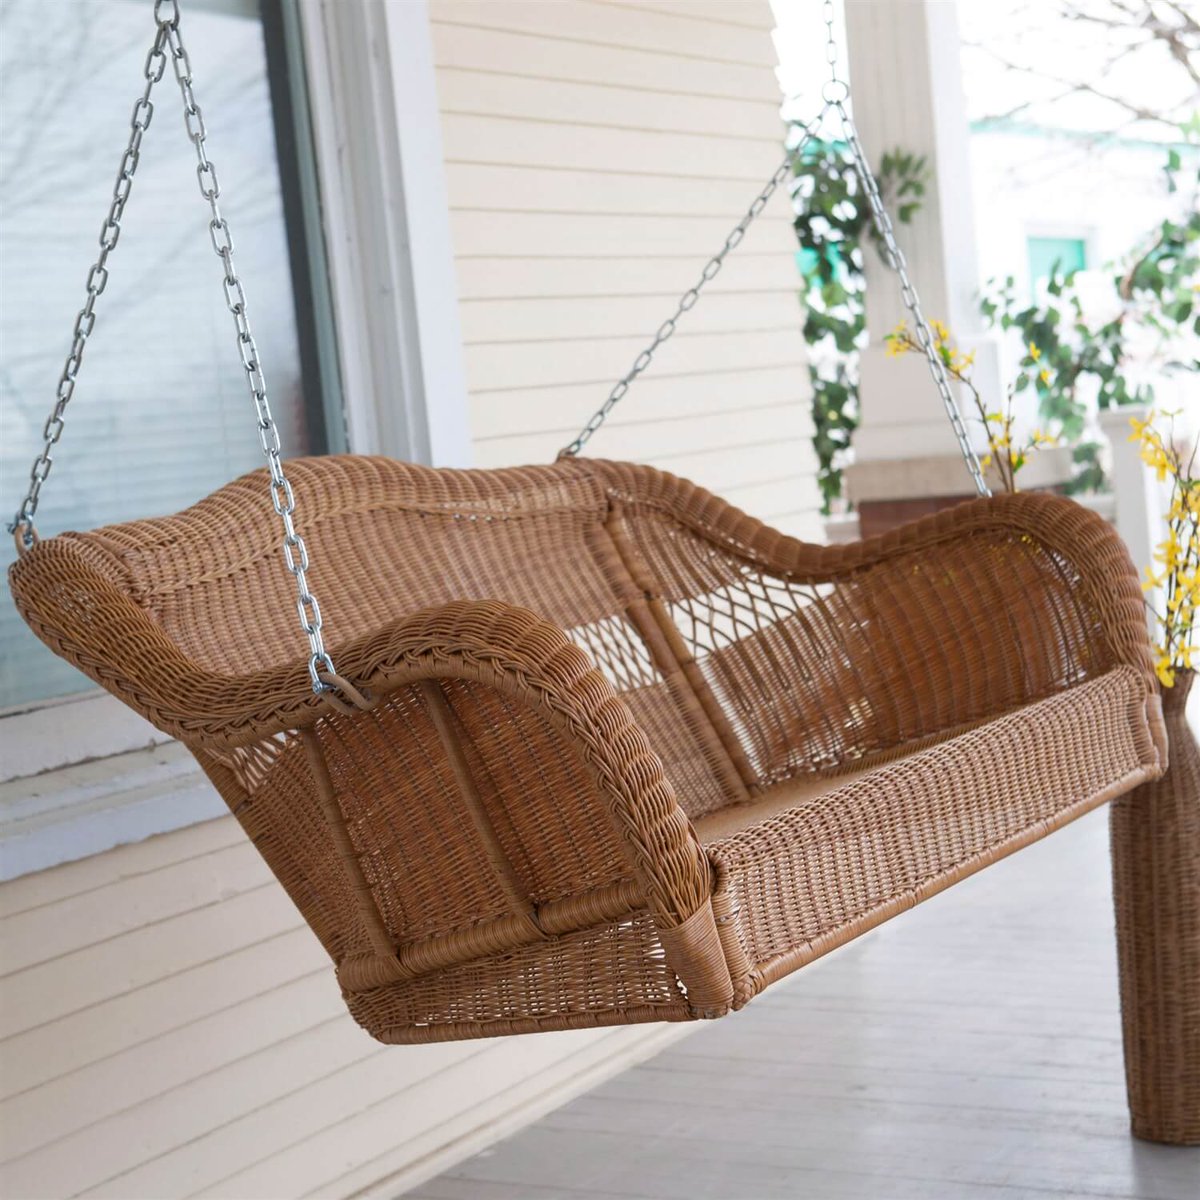 Attractive Porch Swings and Patio Chairs Design Ideas
.
Visit bit.ly/2SfFEoL for more ideas.
.
#thearchitecturedesigns #porchswings #patiochairs